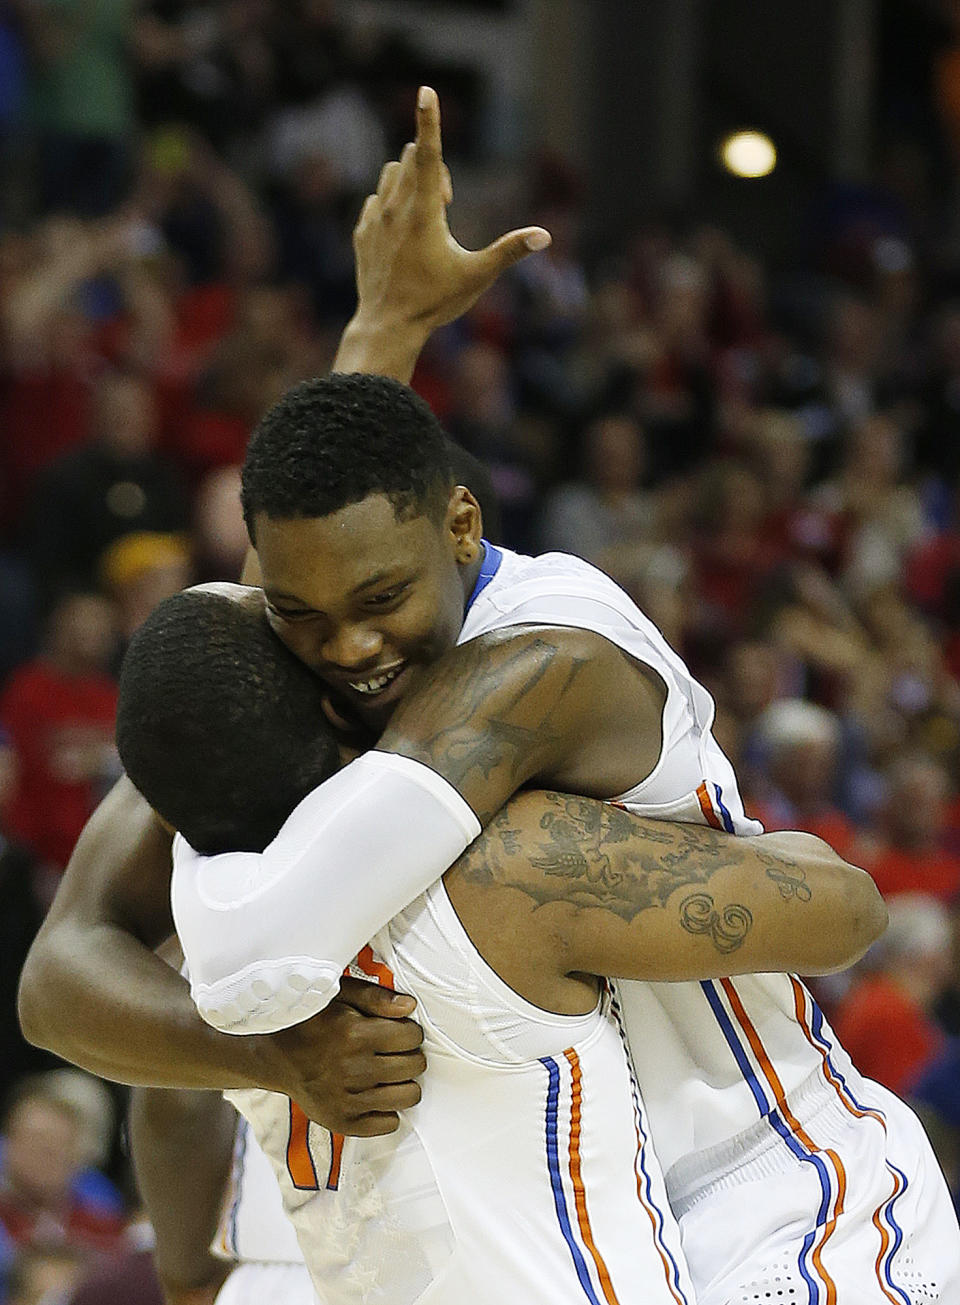 Florida's Lexx Edwards (11) holds Michael Frazier II (20) after the second half in a regional final game against Dayton at the NCAA college basketball tournament, Saturday, March 29, 2014, in Memphis, Tenn. Florida won 62-52. (AP Photo/John Bazemore)